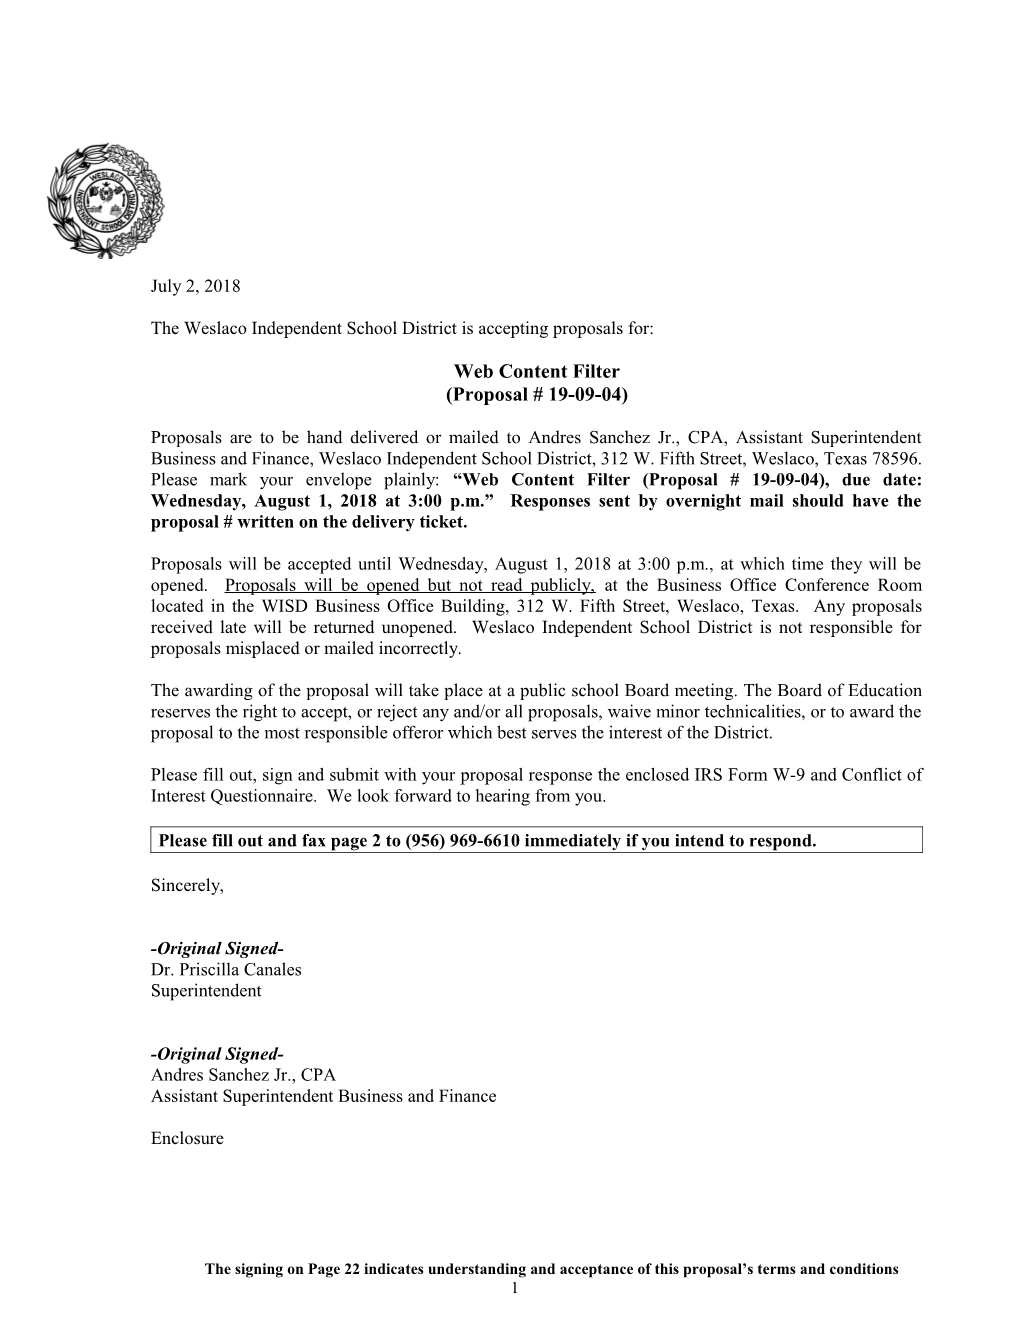 The Weslaco Independent School District Is Accepting Proposals For